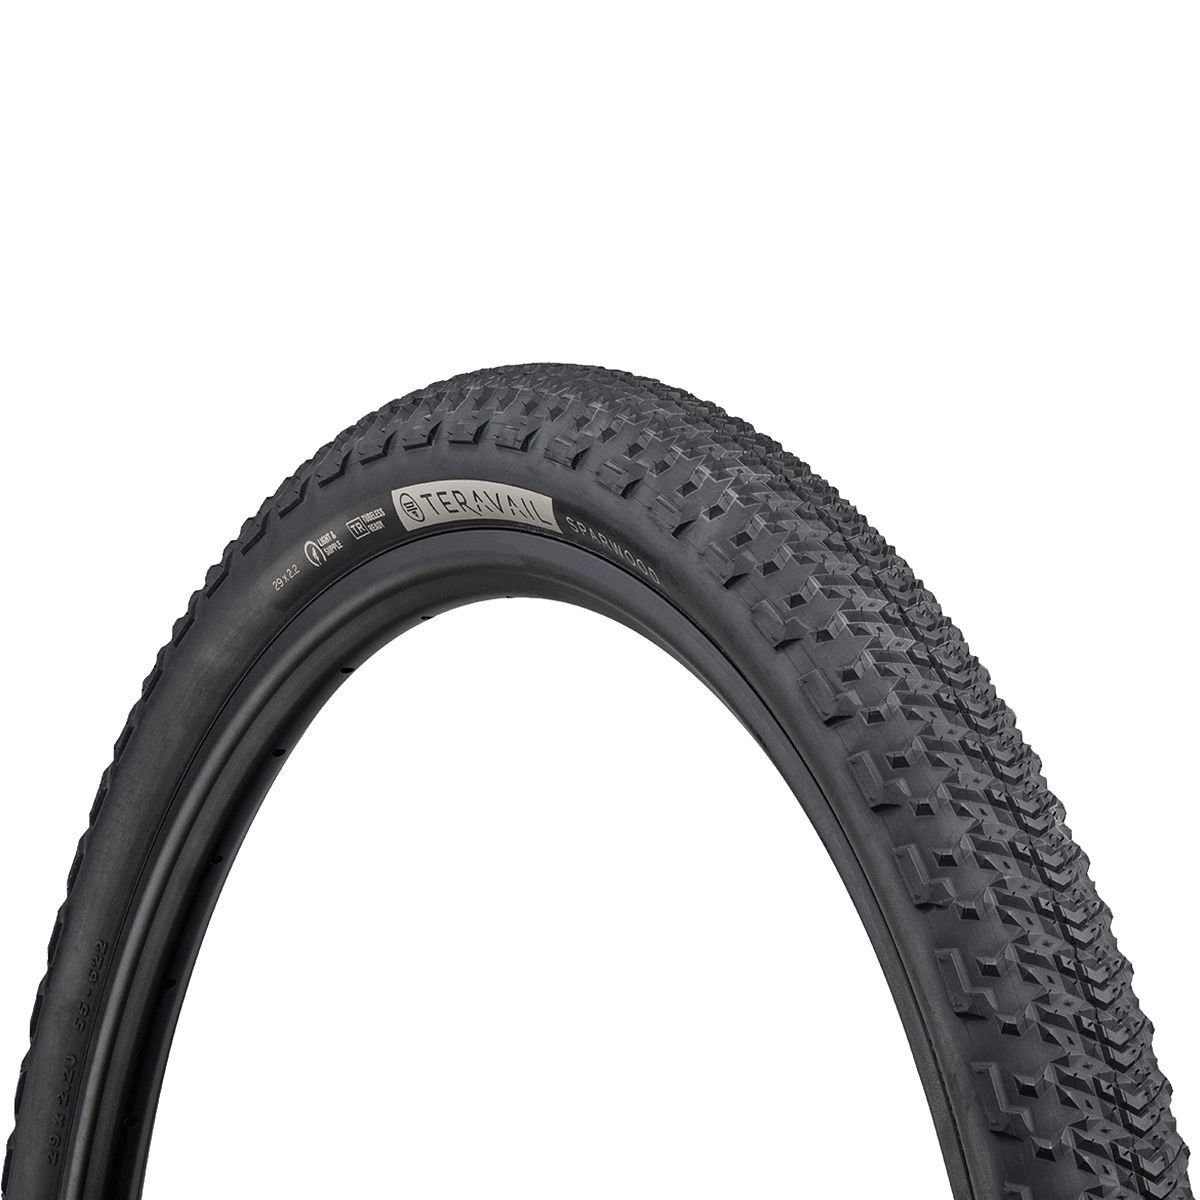 Teravail Sparwood 29in Tire